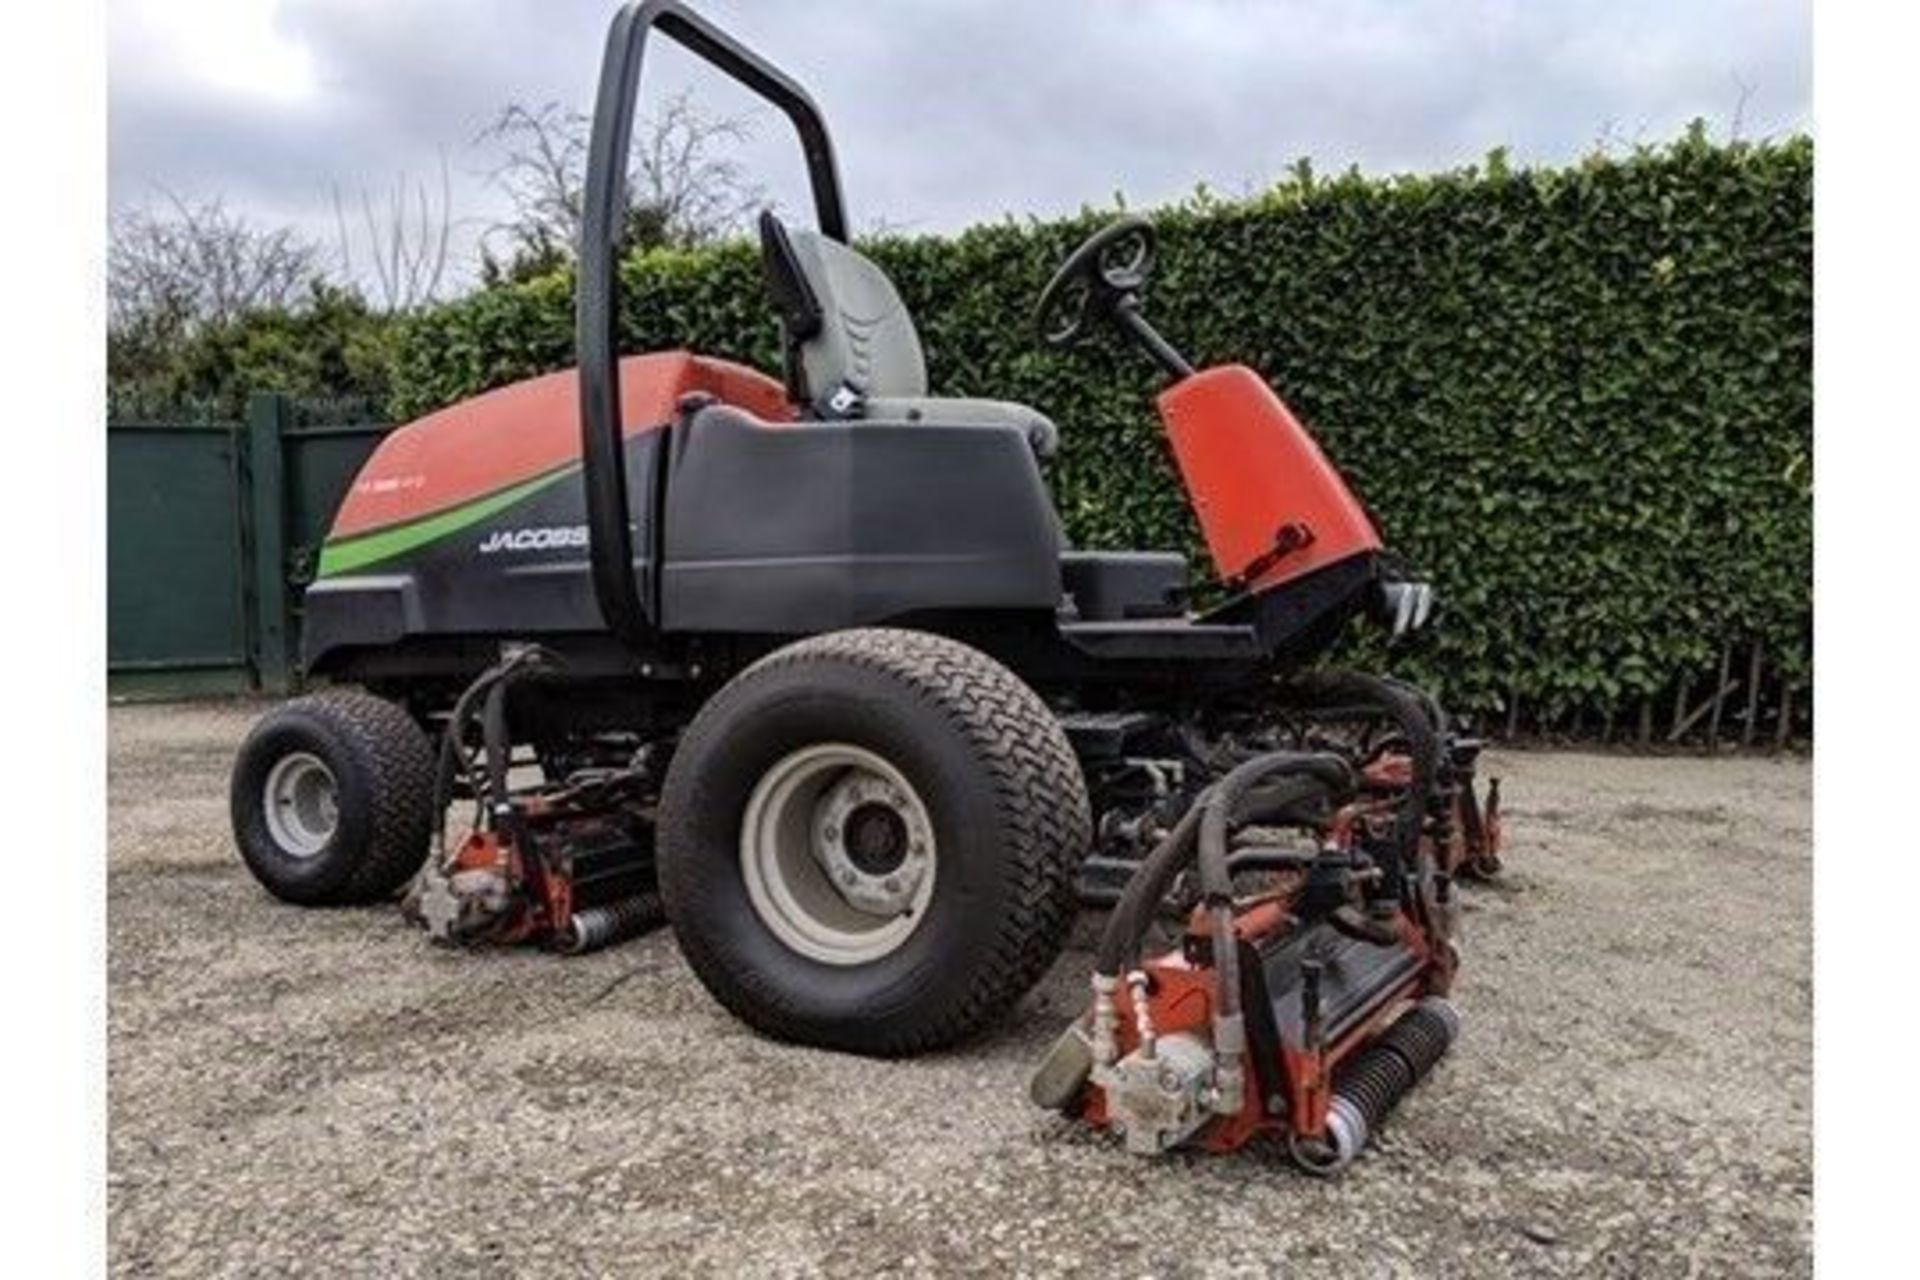 2007 Ransomes Jacobsen LF3800 4WD Cylinder Mower - Image 5 of 8